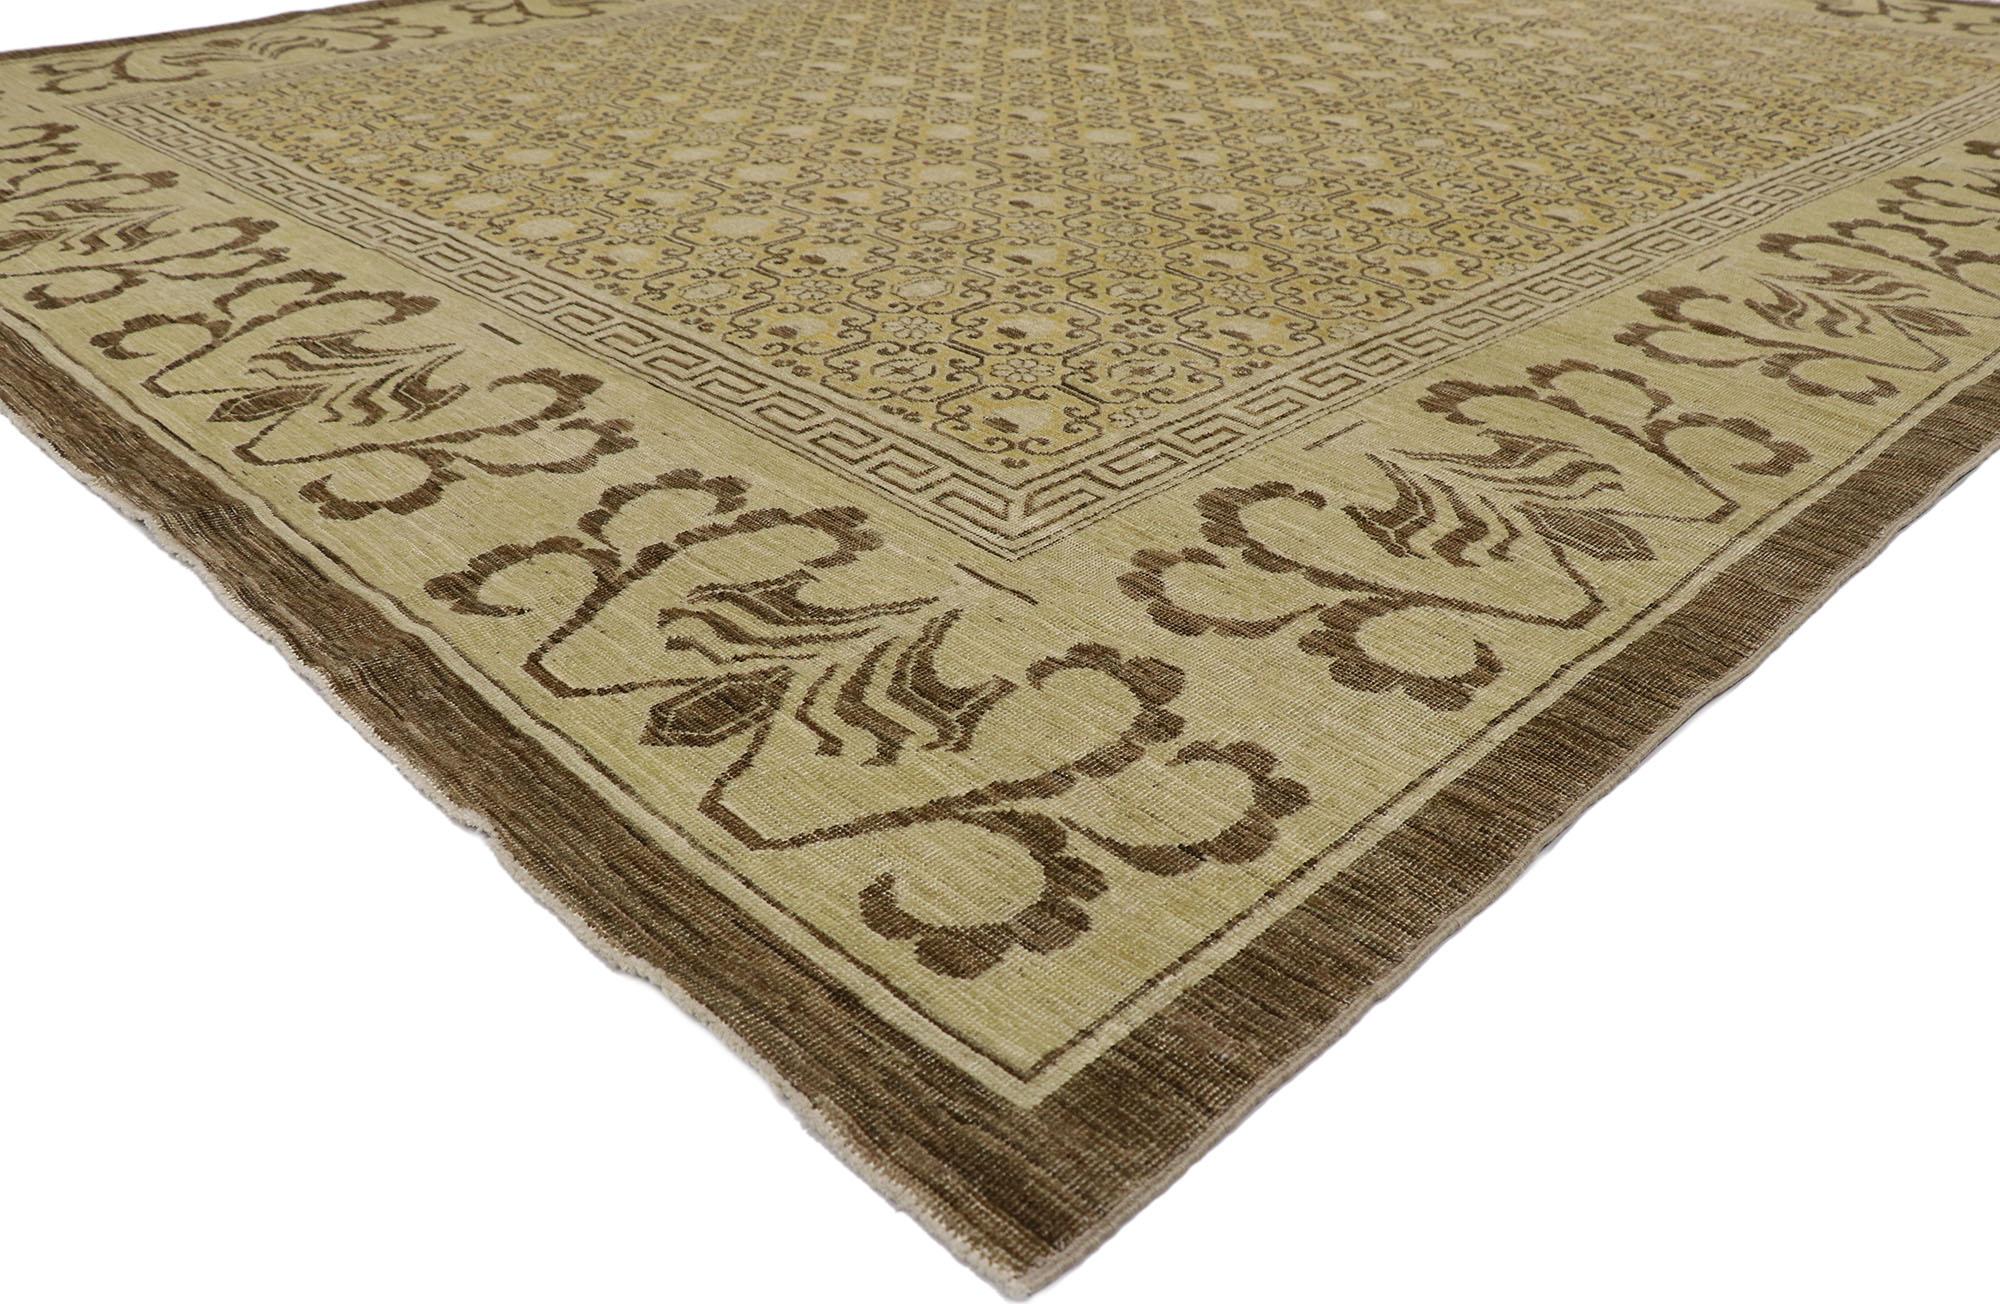 78154 distressed vintage Khotan rug with Modern Rustic style 09'04 x 11'11. Cleverly composed and poised to impress with its rustic sensibility, this hand knotted wool distressed vintage Pakistani Khotan rug will take on a curated lived-in look that